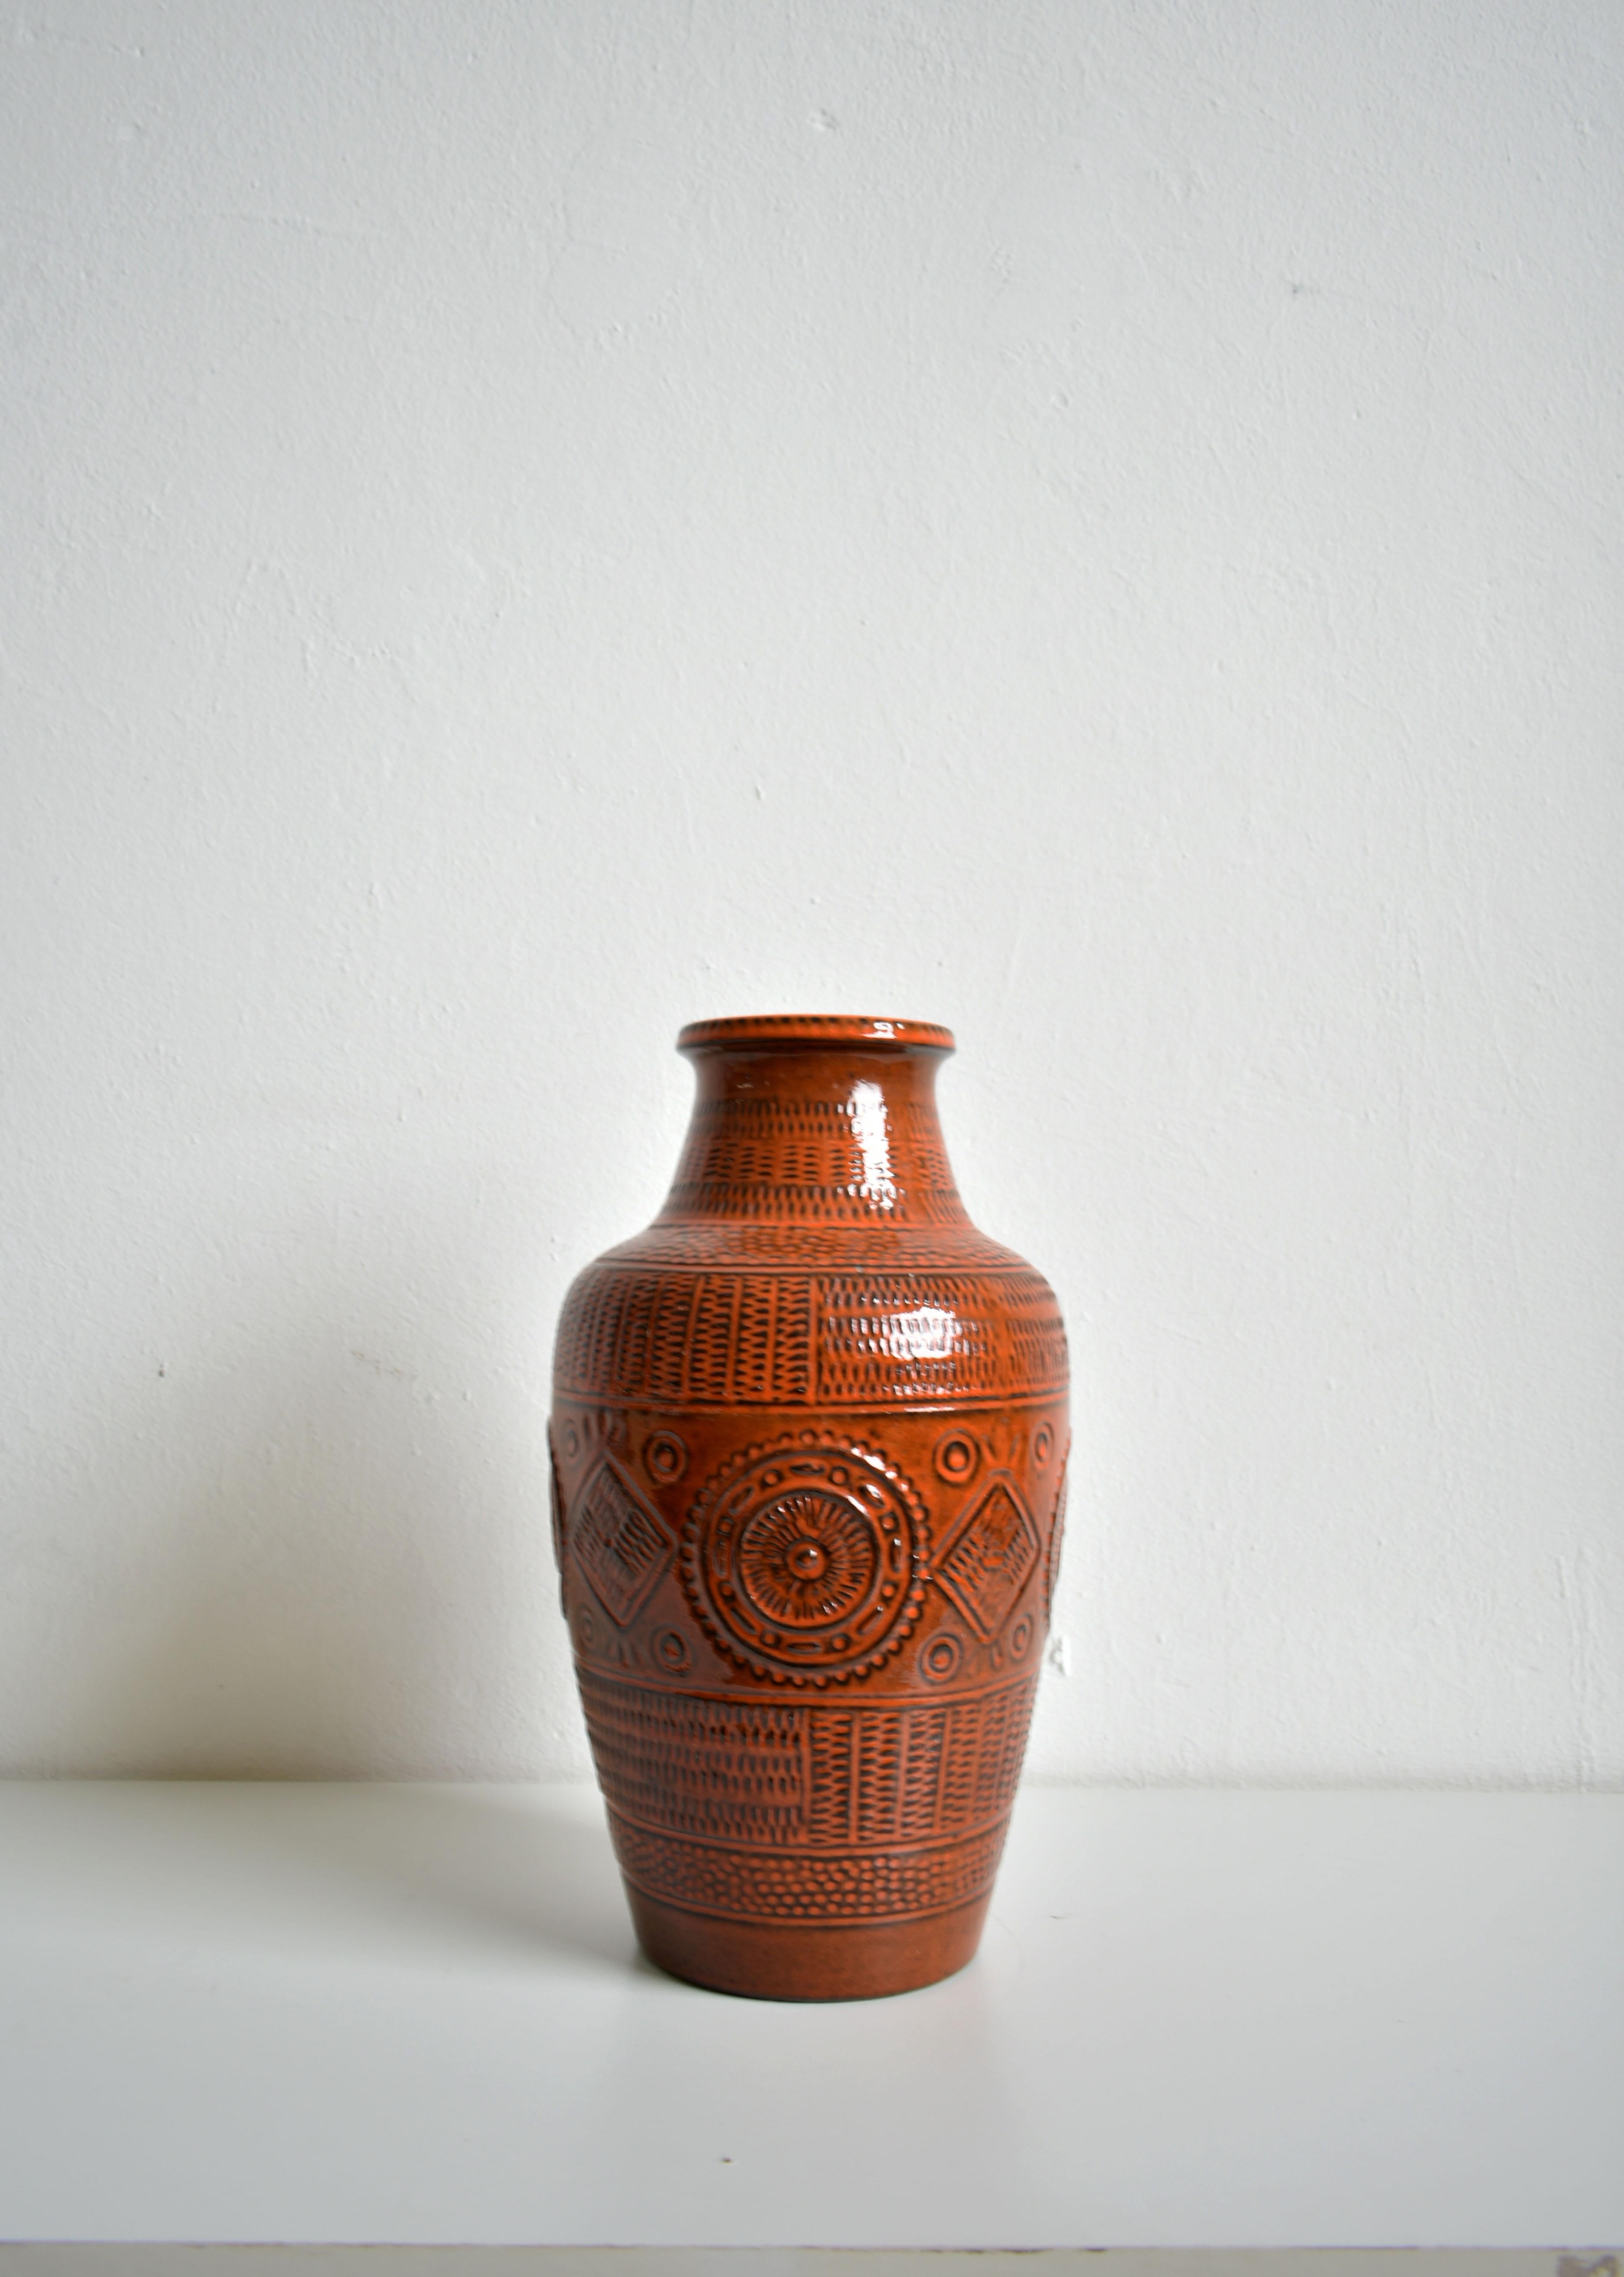 Beautiful German XL vase produced by Bay Keramik in the 1960s

Model 'Contura', signed at the bottom with number 550/45

The vase measures 45 cm in height

The vase is in very good vintage condition, without any damage or defects.